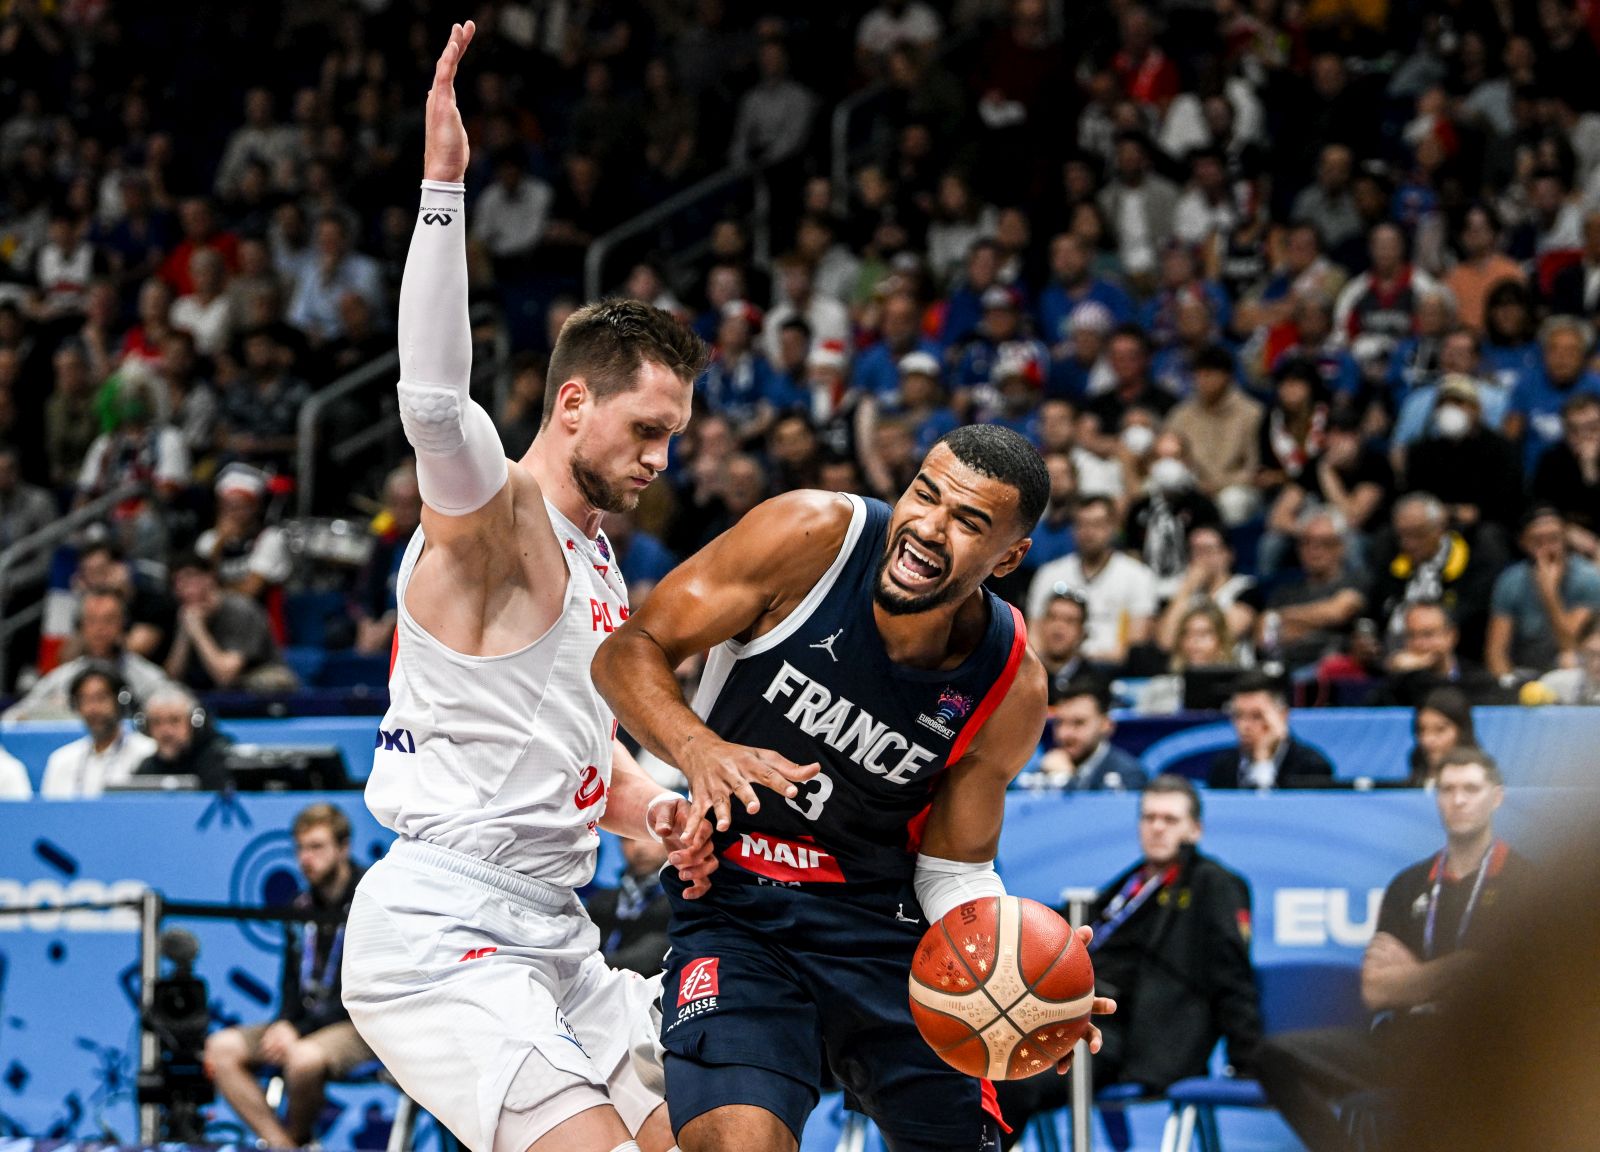 epa10188346 Mateusz Ponitka (L) of Poland in action against Timothe Luwawu-Cabarrot (R) of France during the FIBA EuroBasket 2022 semi final match between Poland and France at EuroBasket Arena in Berlin, Germany, 16 September 2022.  EPA/FILIP SINGER